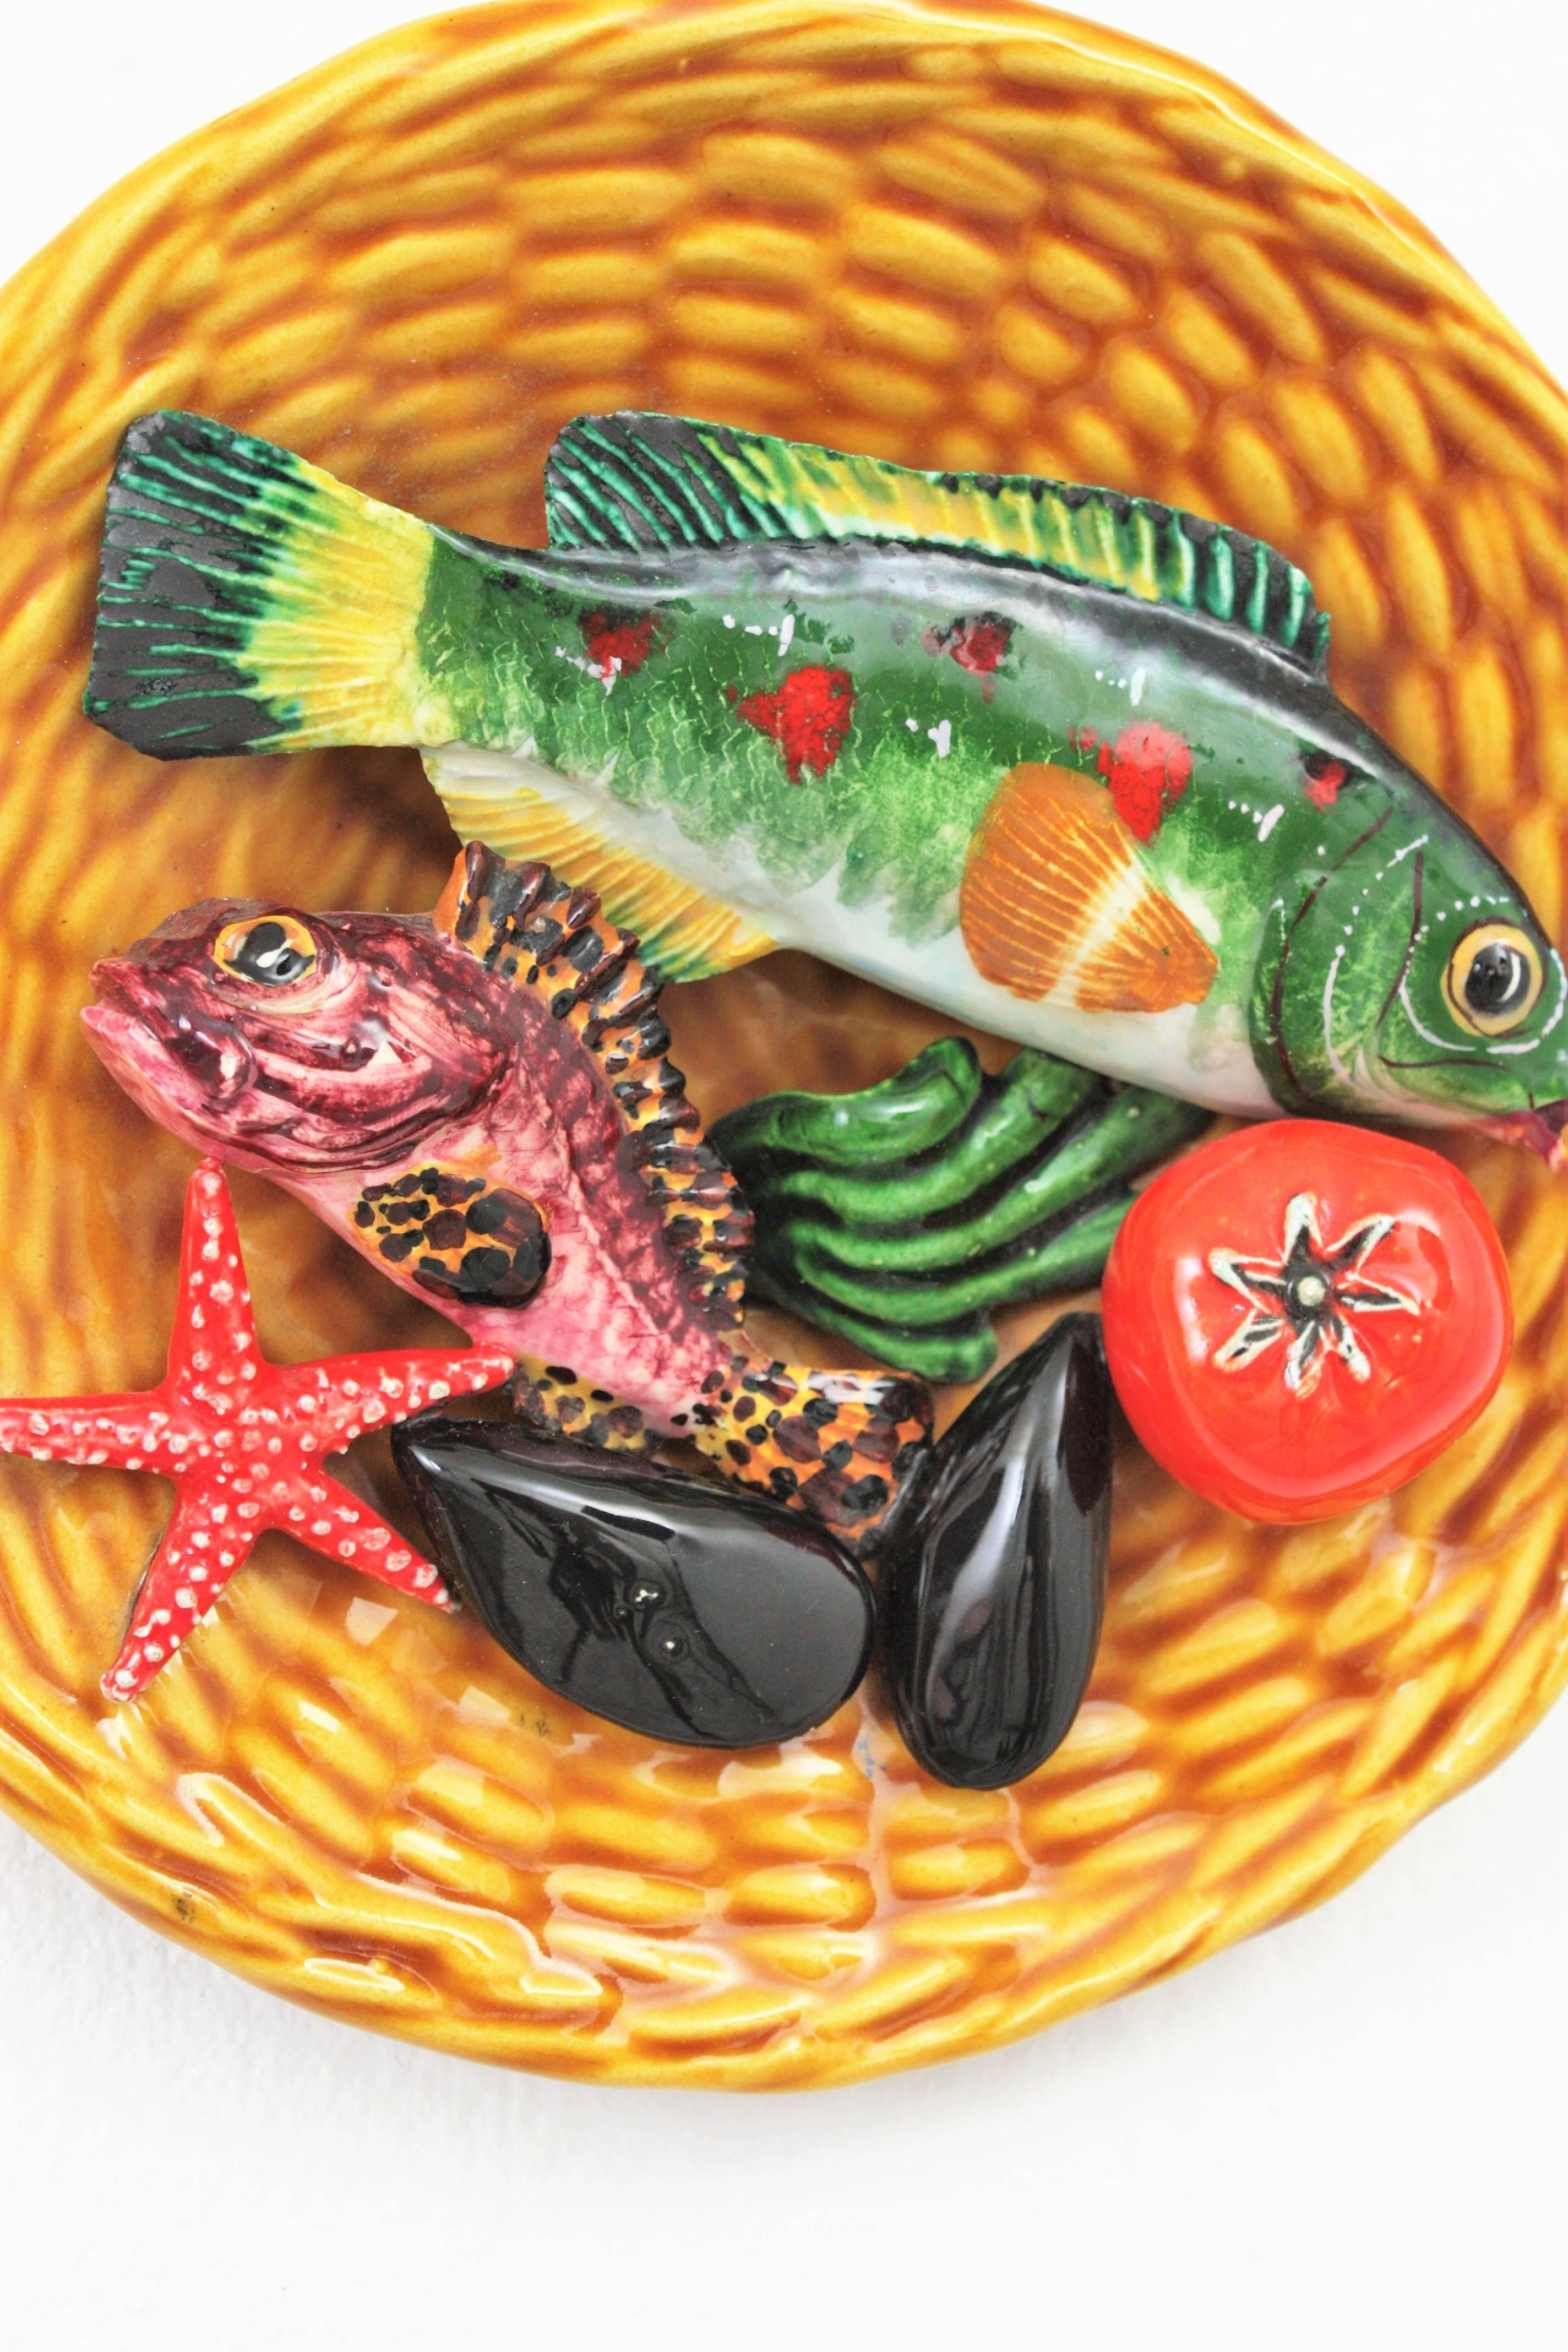 Eye-catching glazed ceramic trompe l'oeil seafood basket wall plate manufactured by Atelier Lamarche Monaco.
This piece would be a nice addition as wall decoration in a kitchen or dining room. Lovely to create a wall composition with other trompe